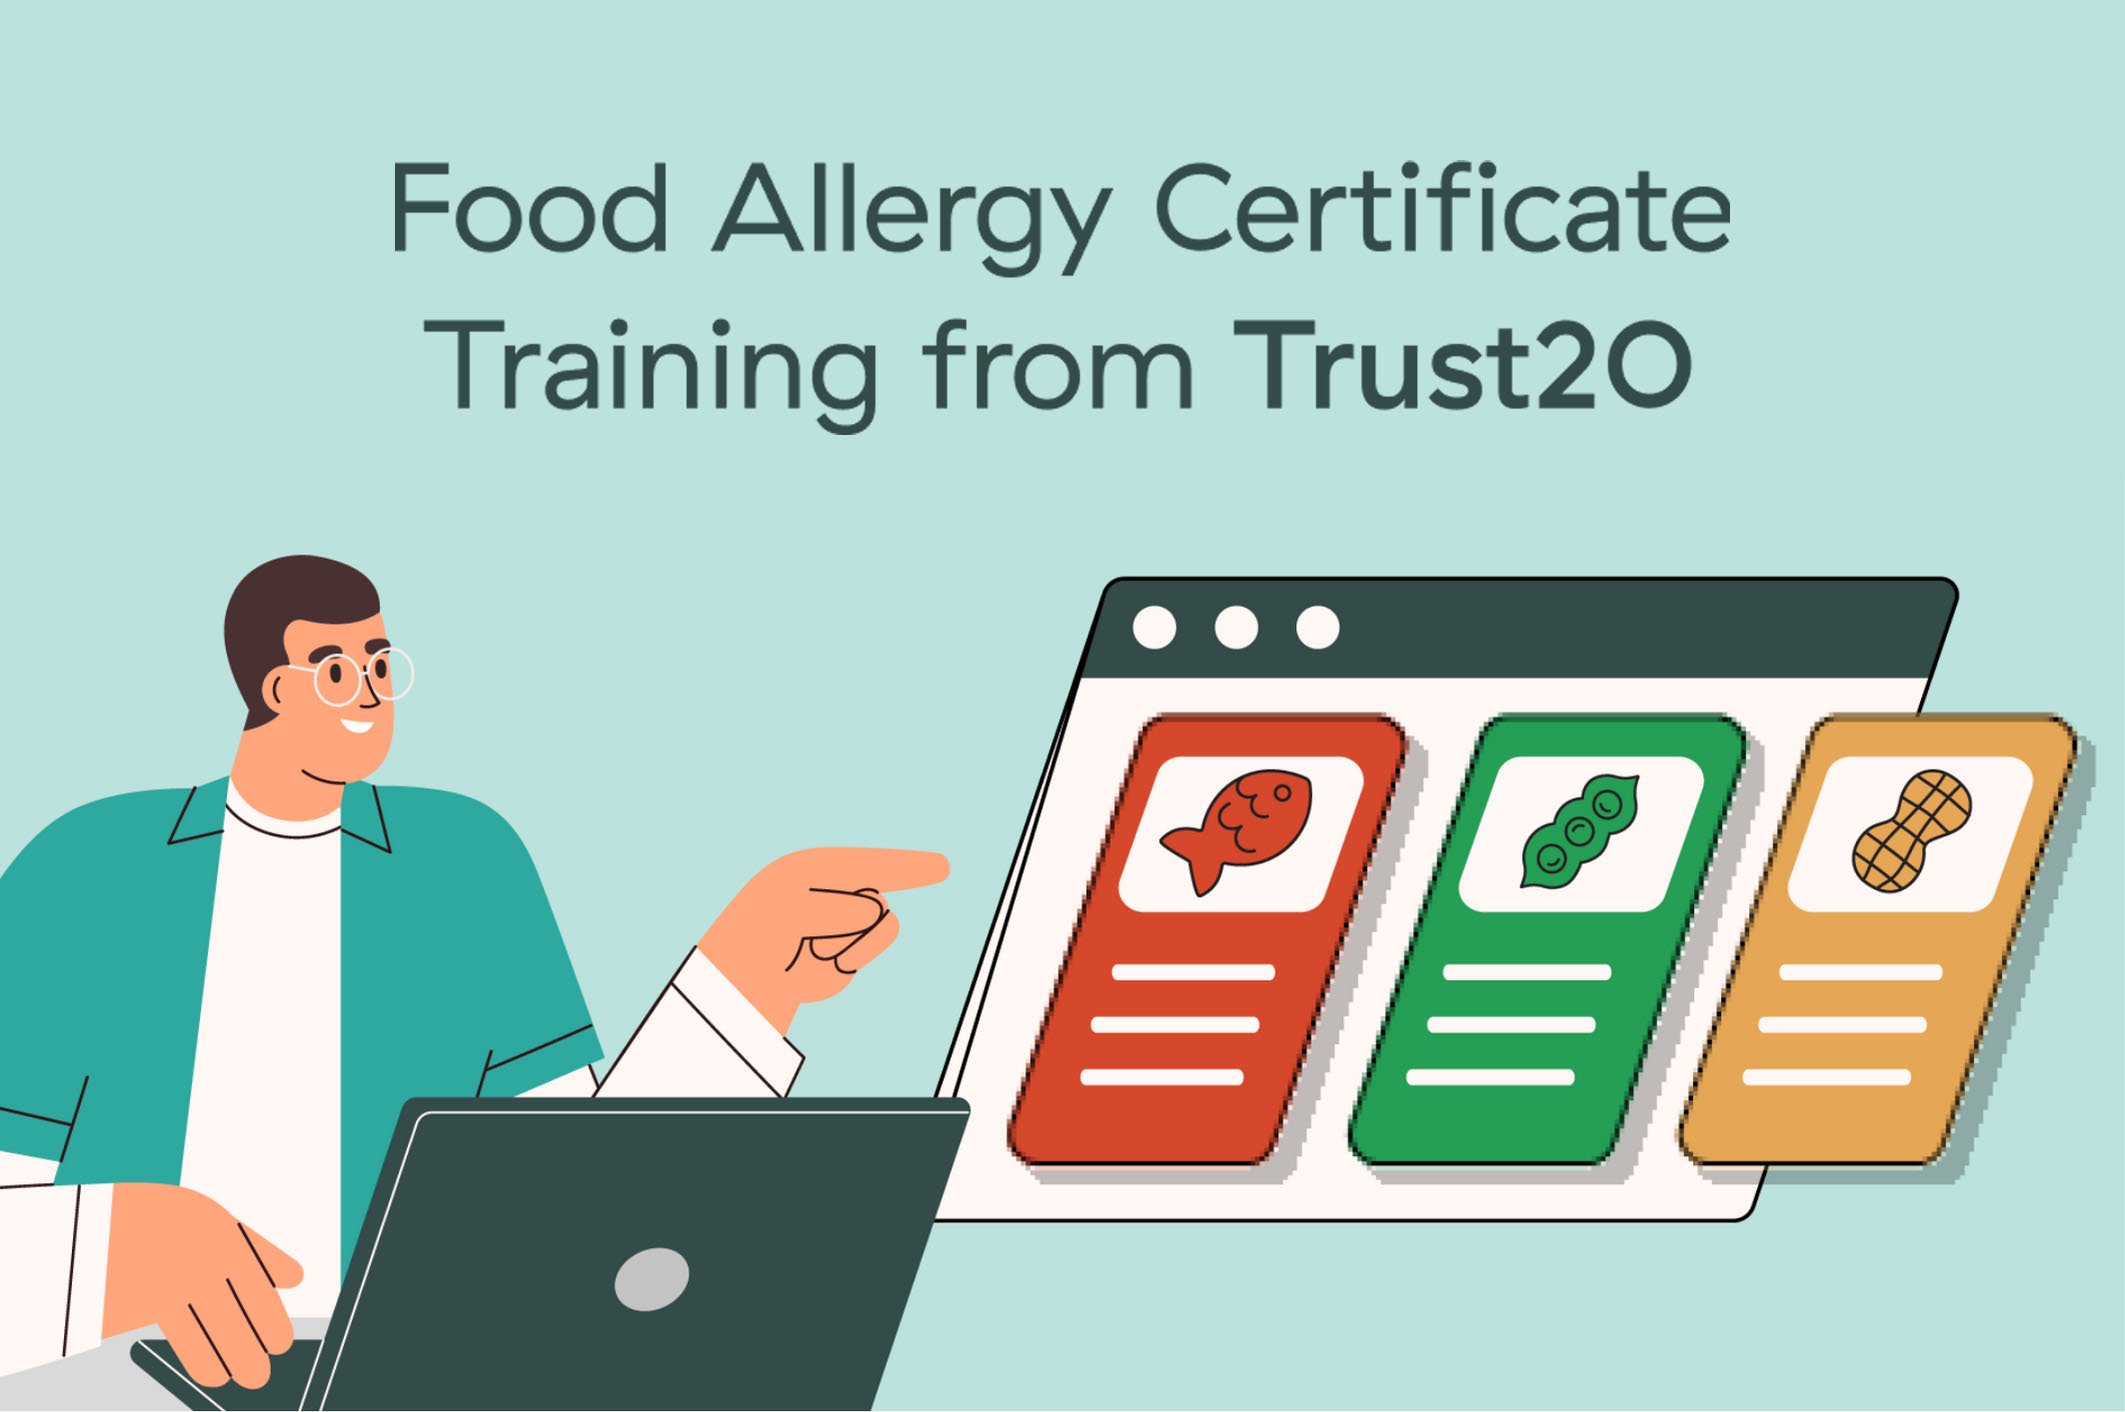 Get a Food Allergy Certificate with Trust20's training